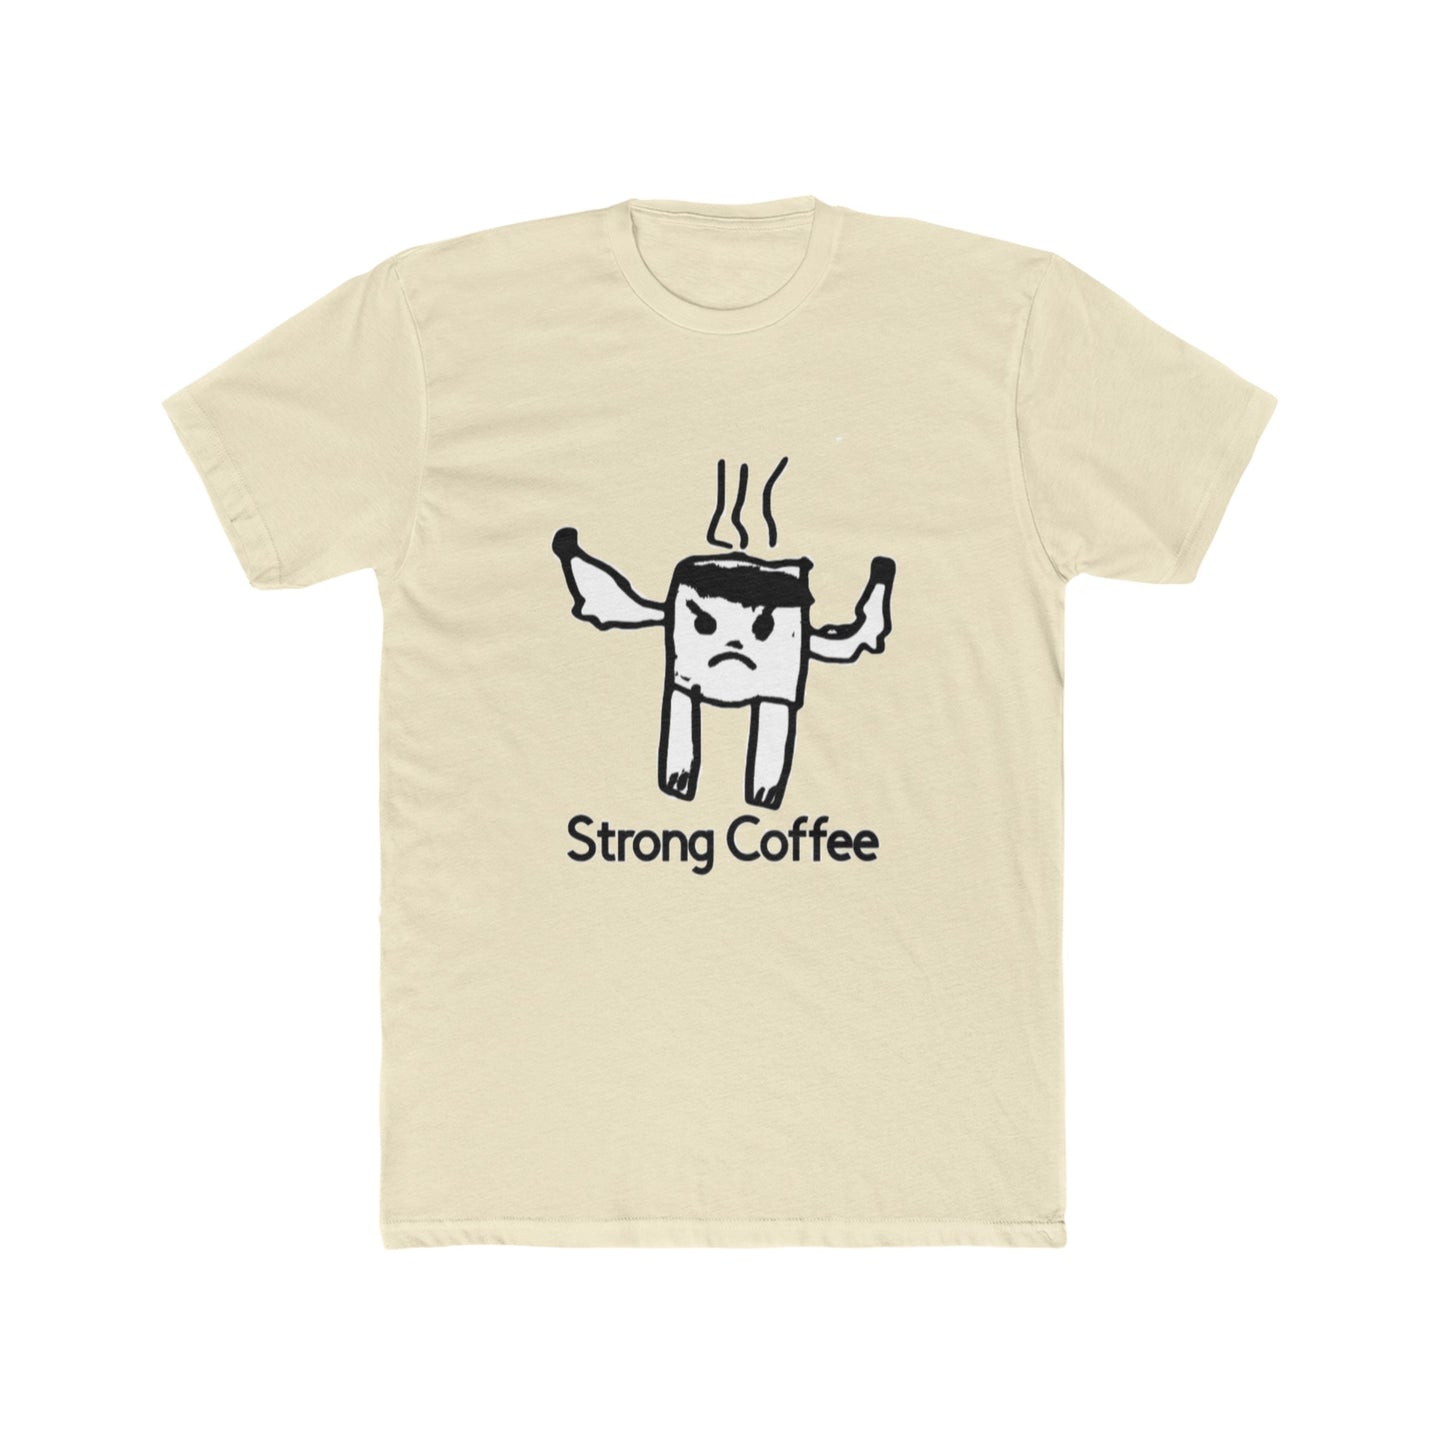 "Strong Coffee" by Emmalyn Next Level Tee